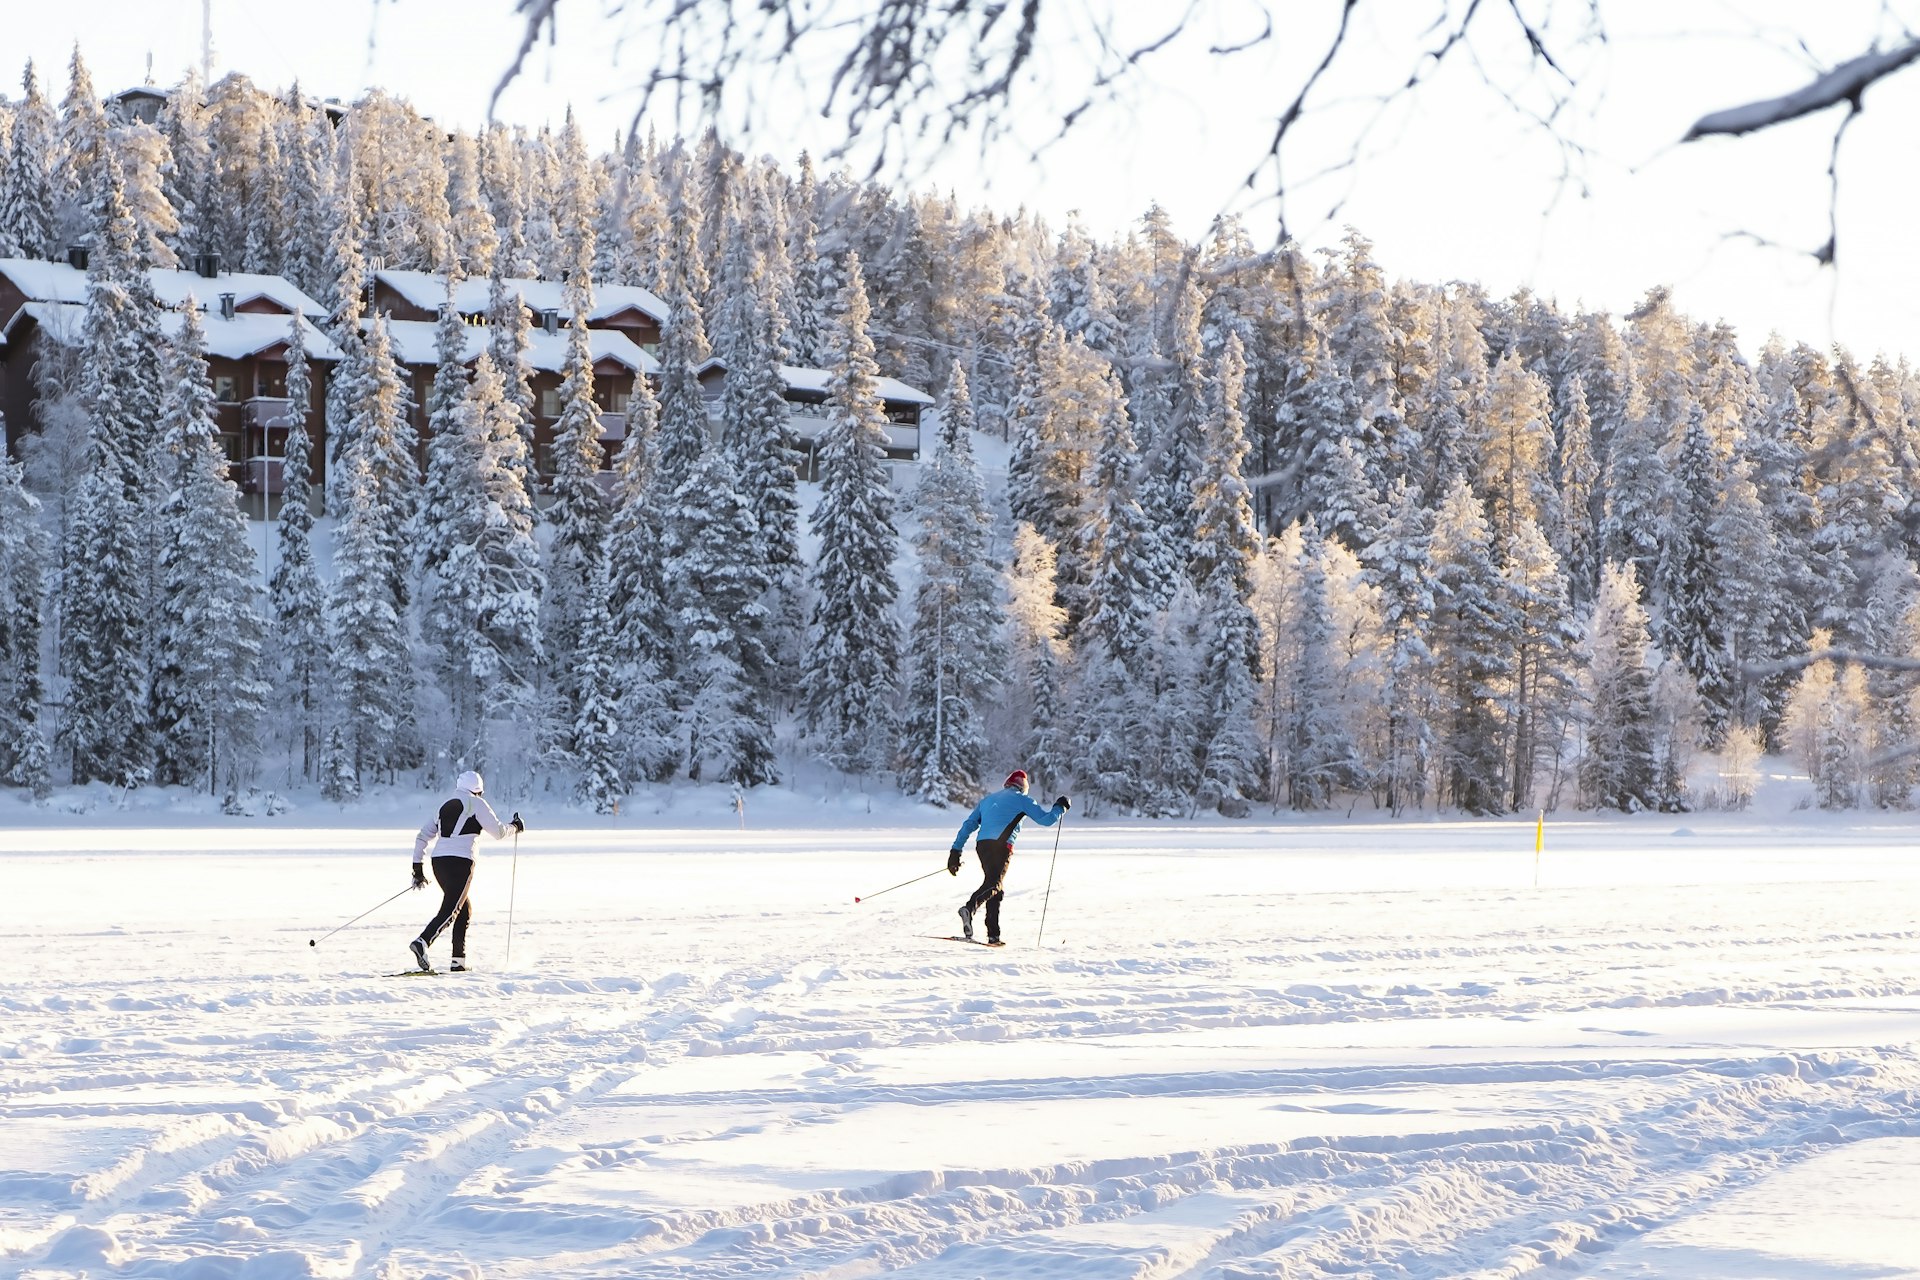 Two athletes cross-country skiing on a frozen lake against the snow-covered forest